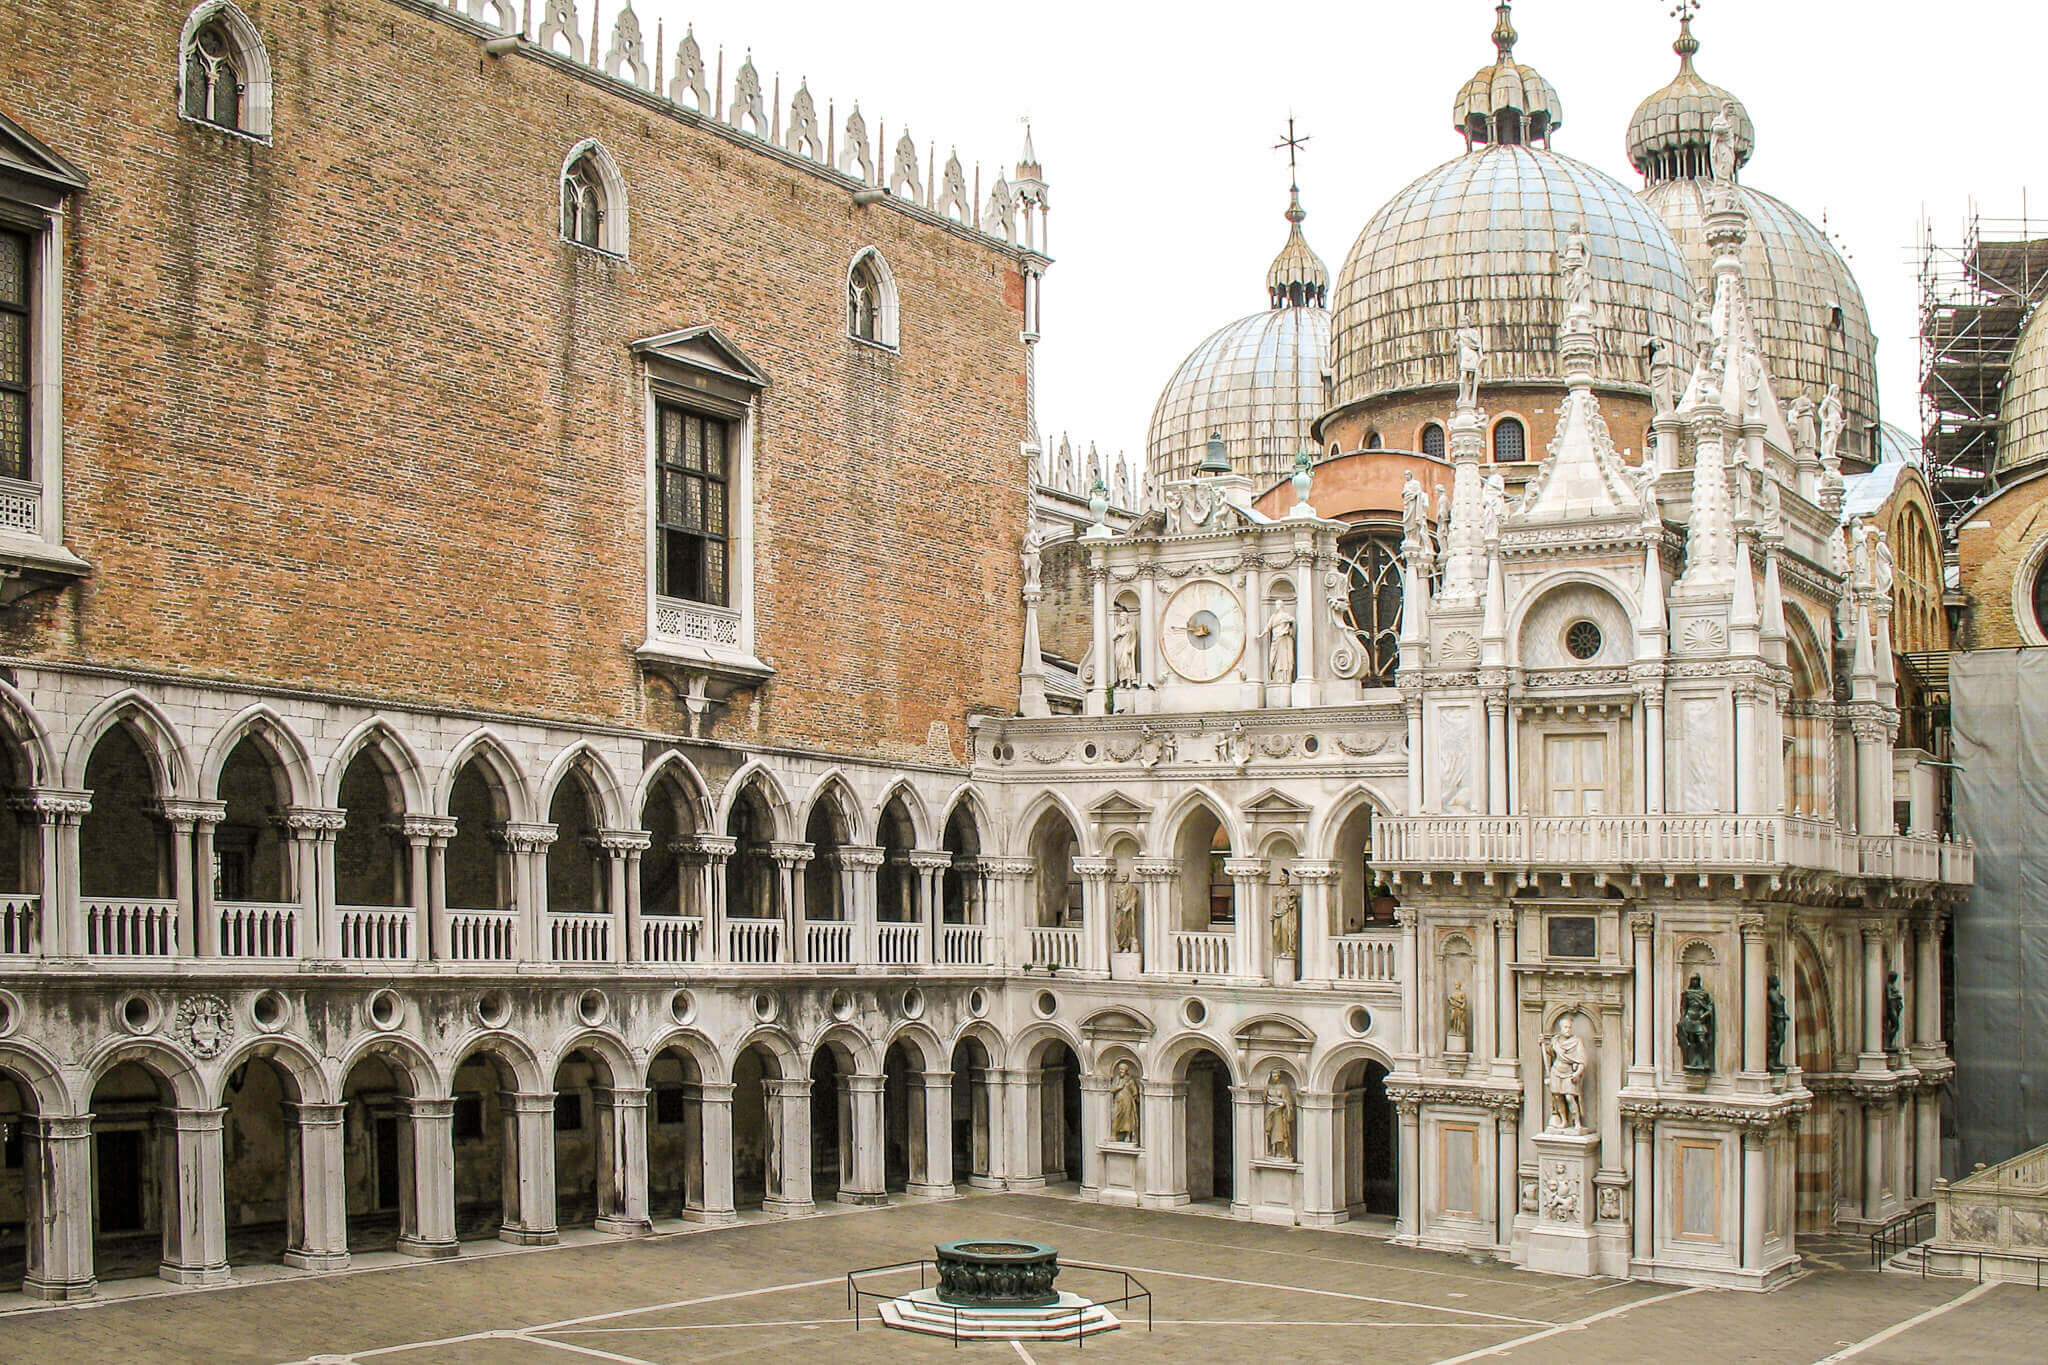 The courtyard of the Palazzo Ducale in Venice, connecting with St. Mark's basilica